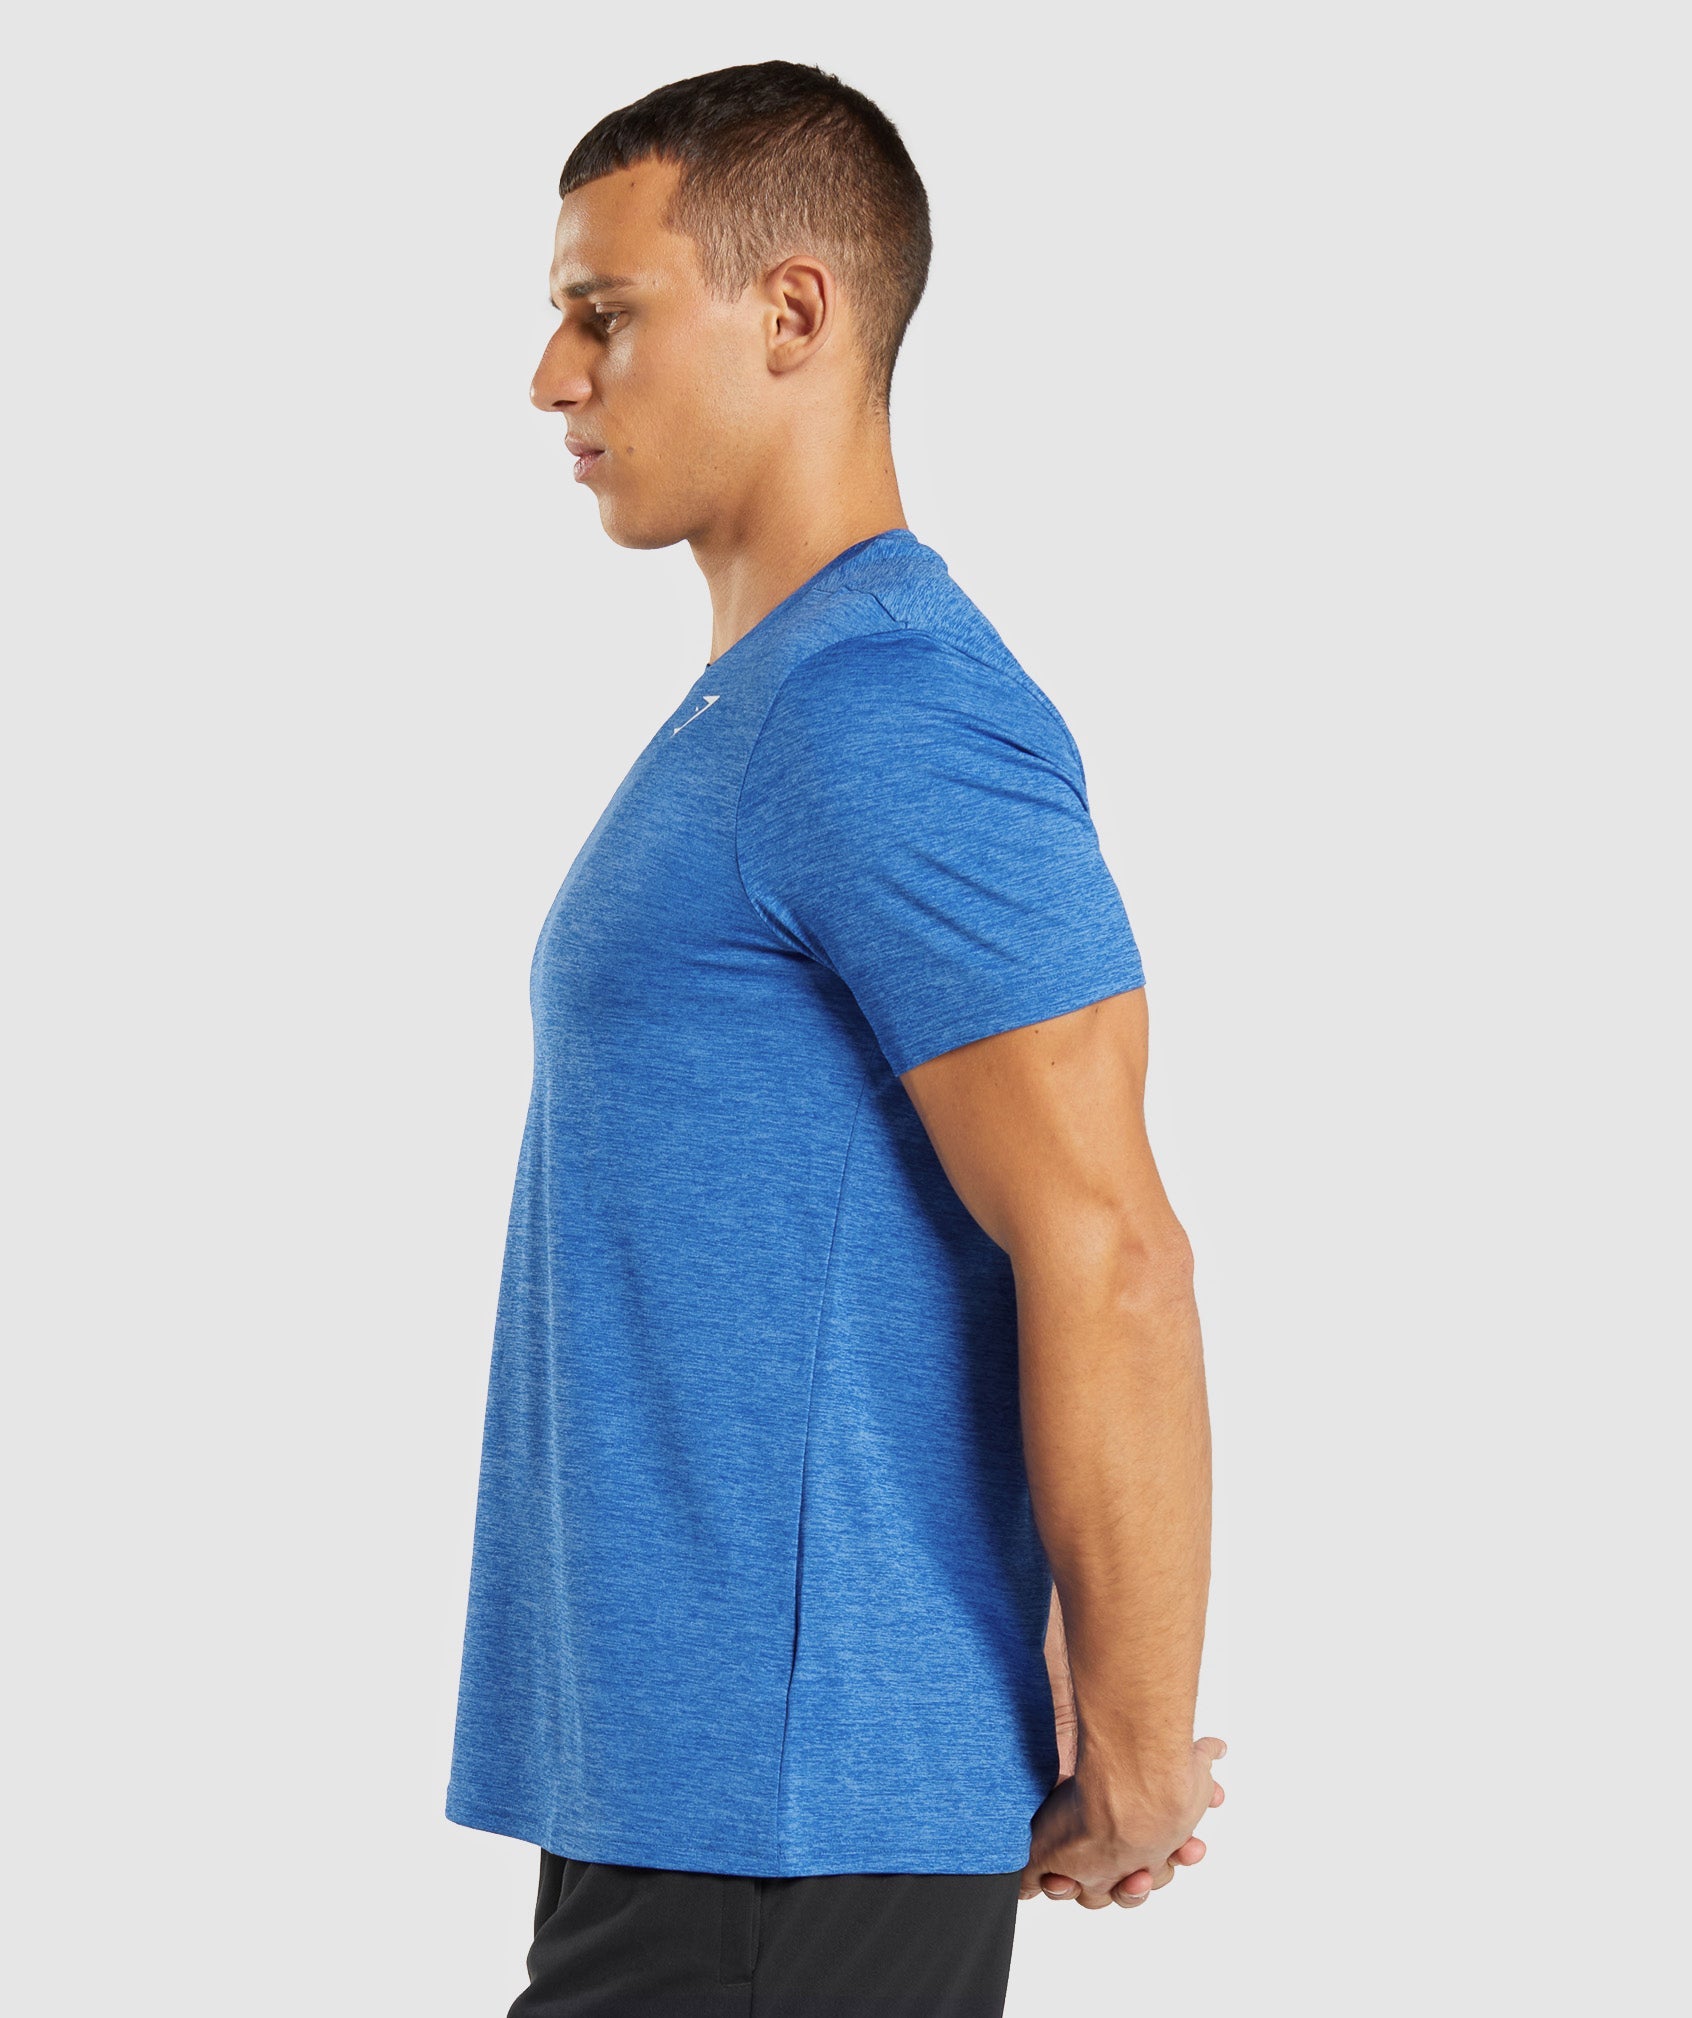 Arrival Marl T-Shirt in Athletic Blue/Javelin Blue Marl - view 3